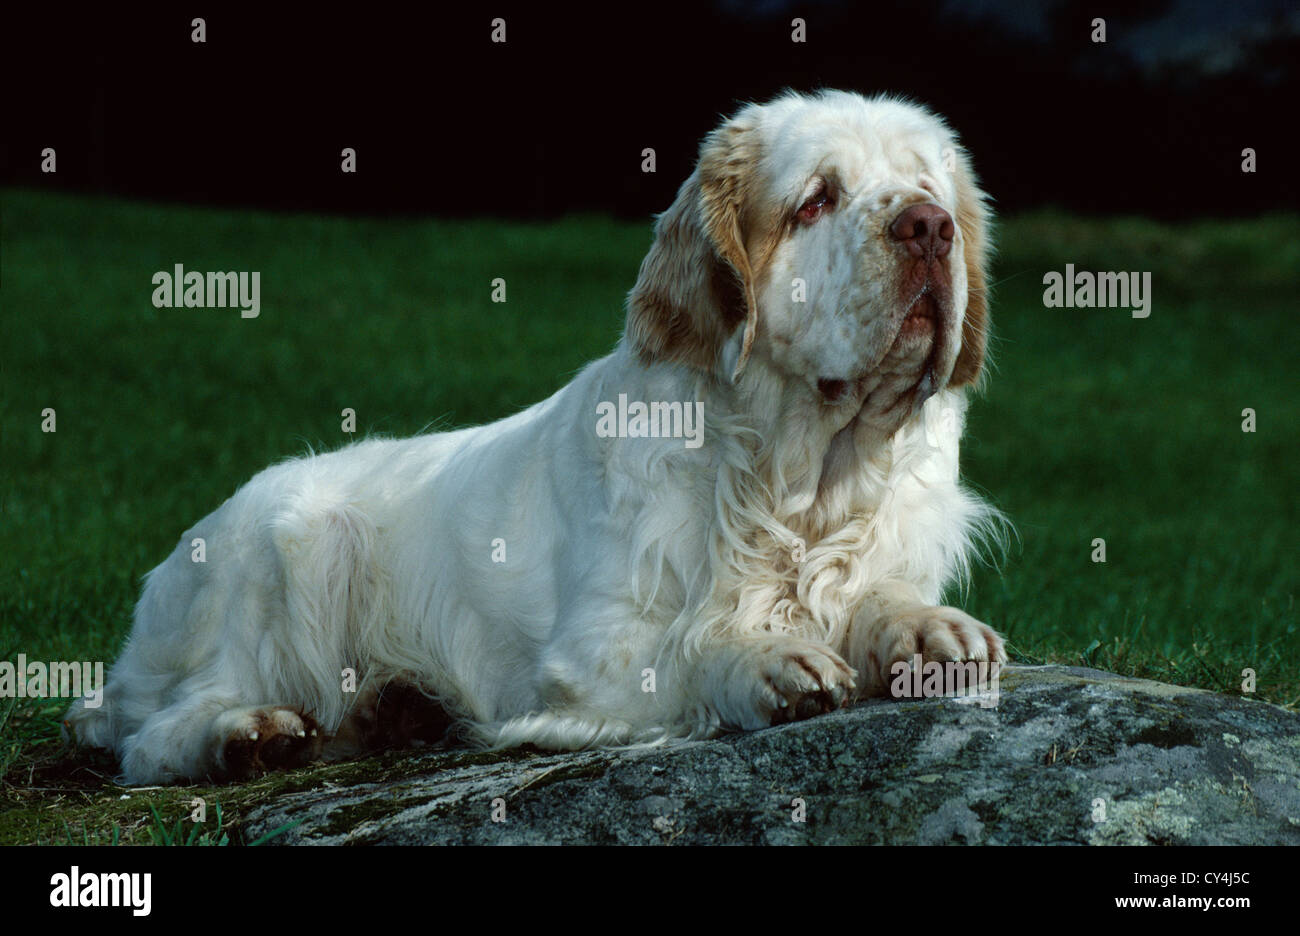 ADULT CLUMBER SPANIEL LAYING IN YARD Stock Photo